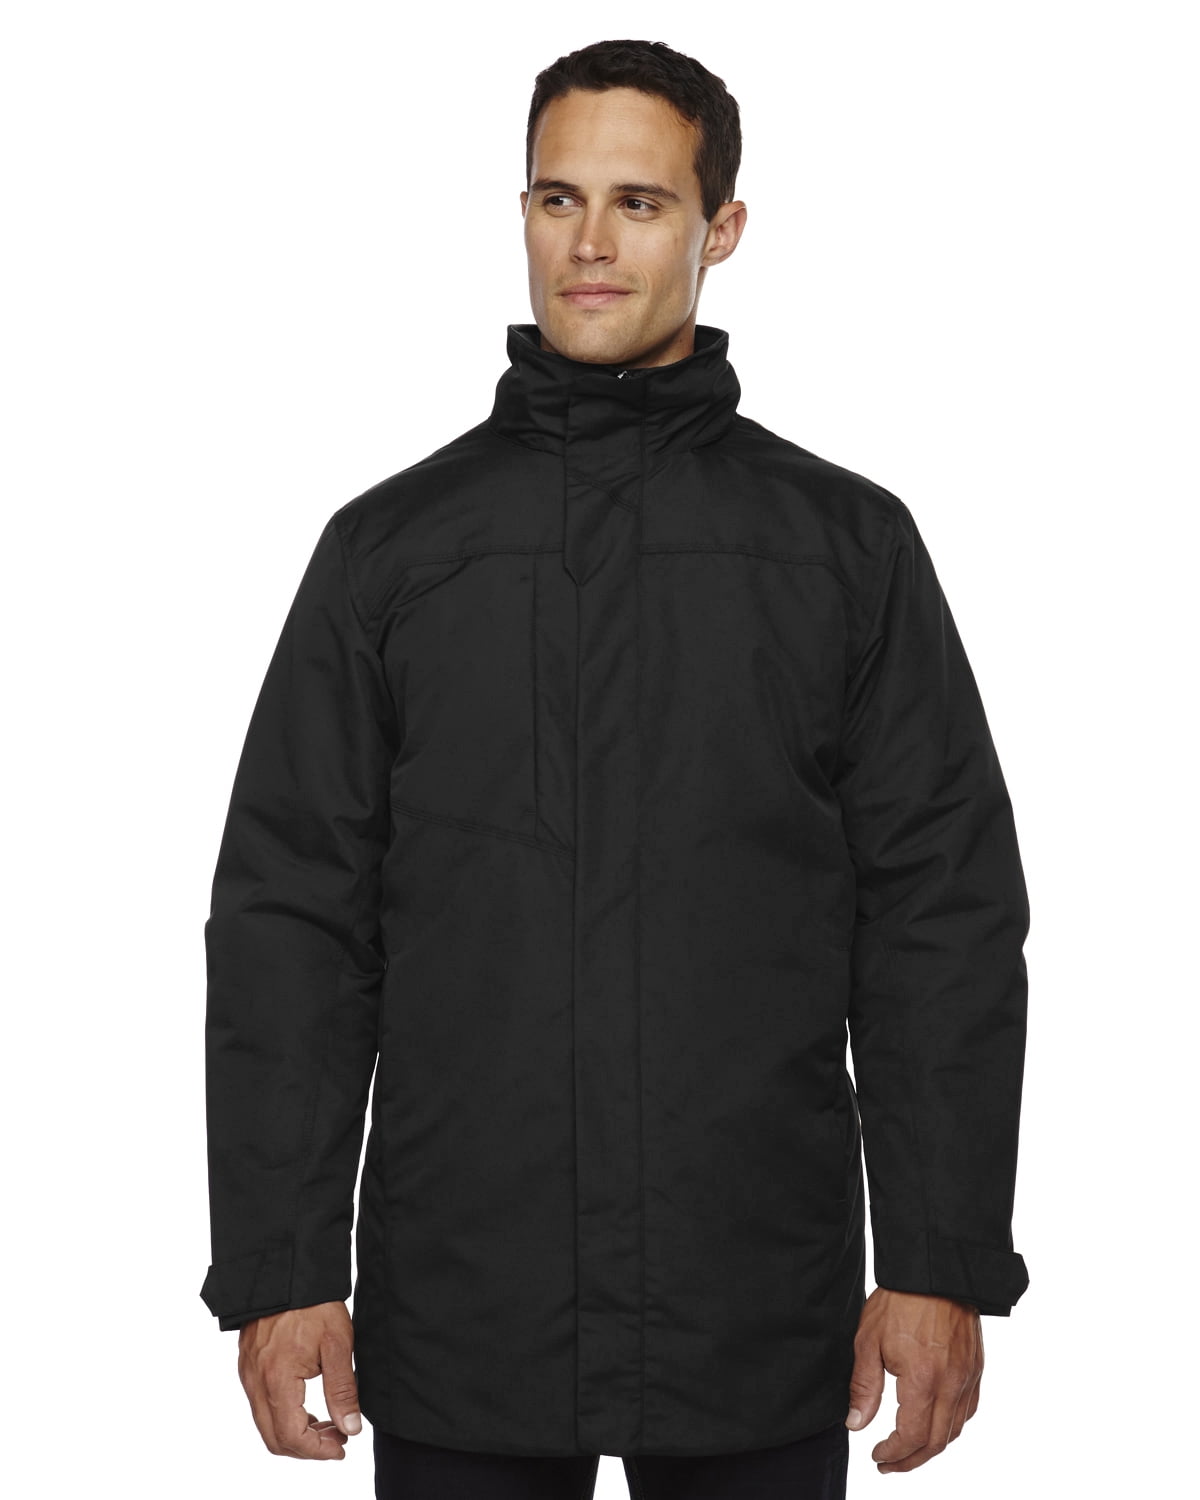 North End Promote Men's Insulated Car Jacket | Walmart Canada